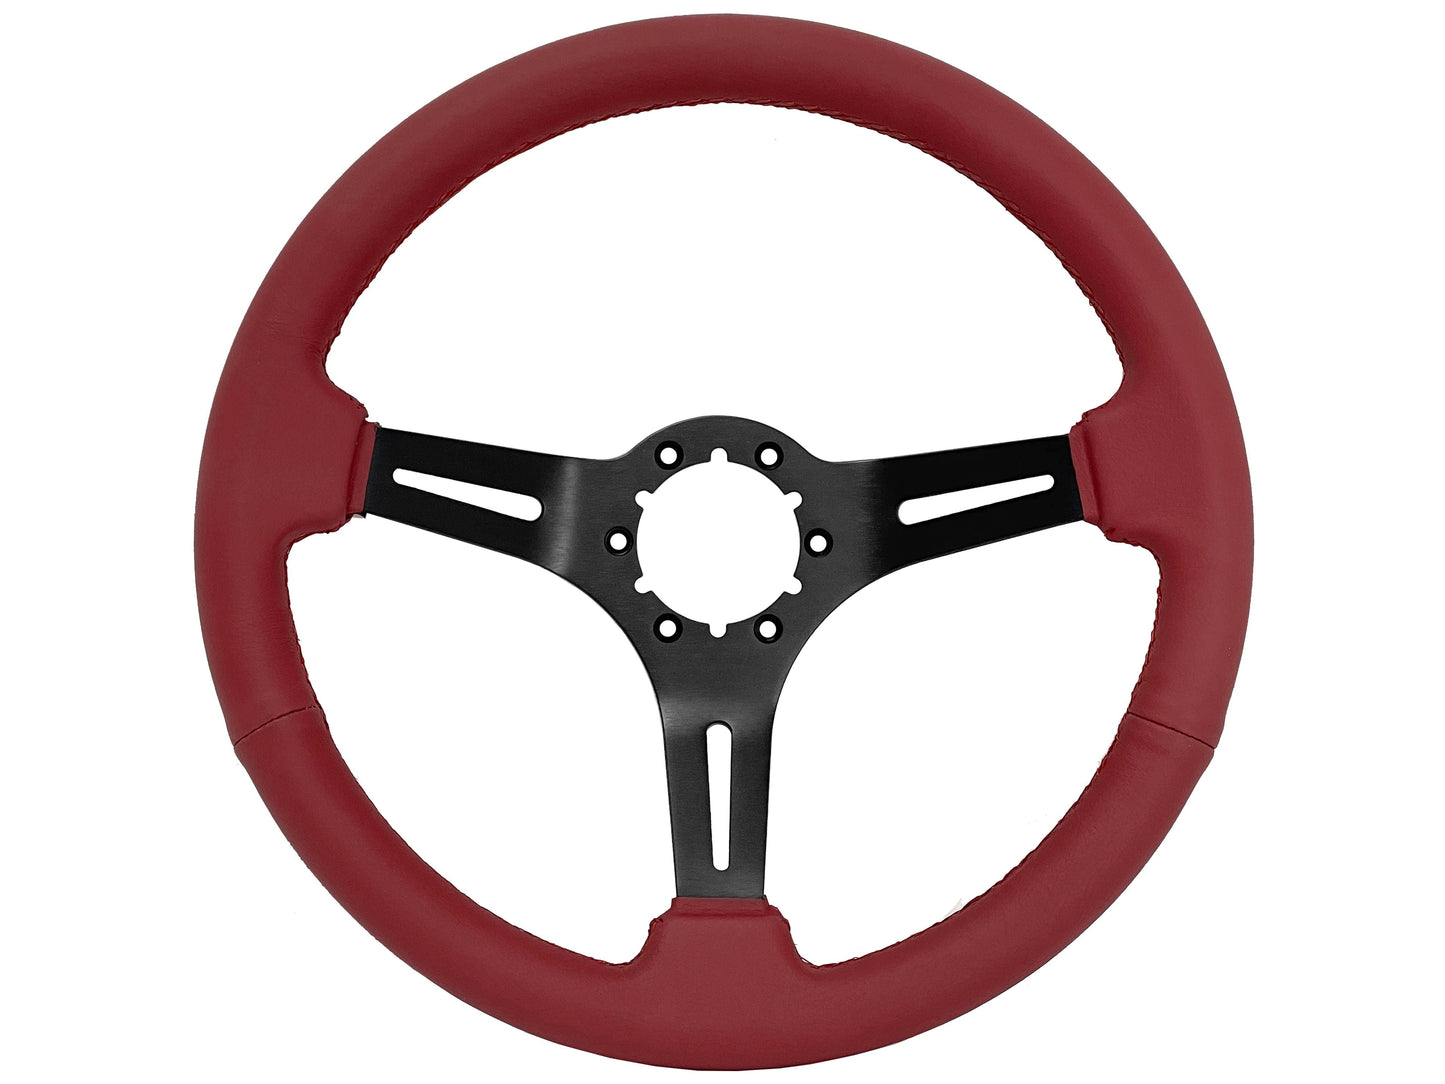 1963-64 Ford Falcon Steering Wheel Kit | Red Leather | ST3060RED